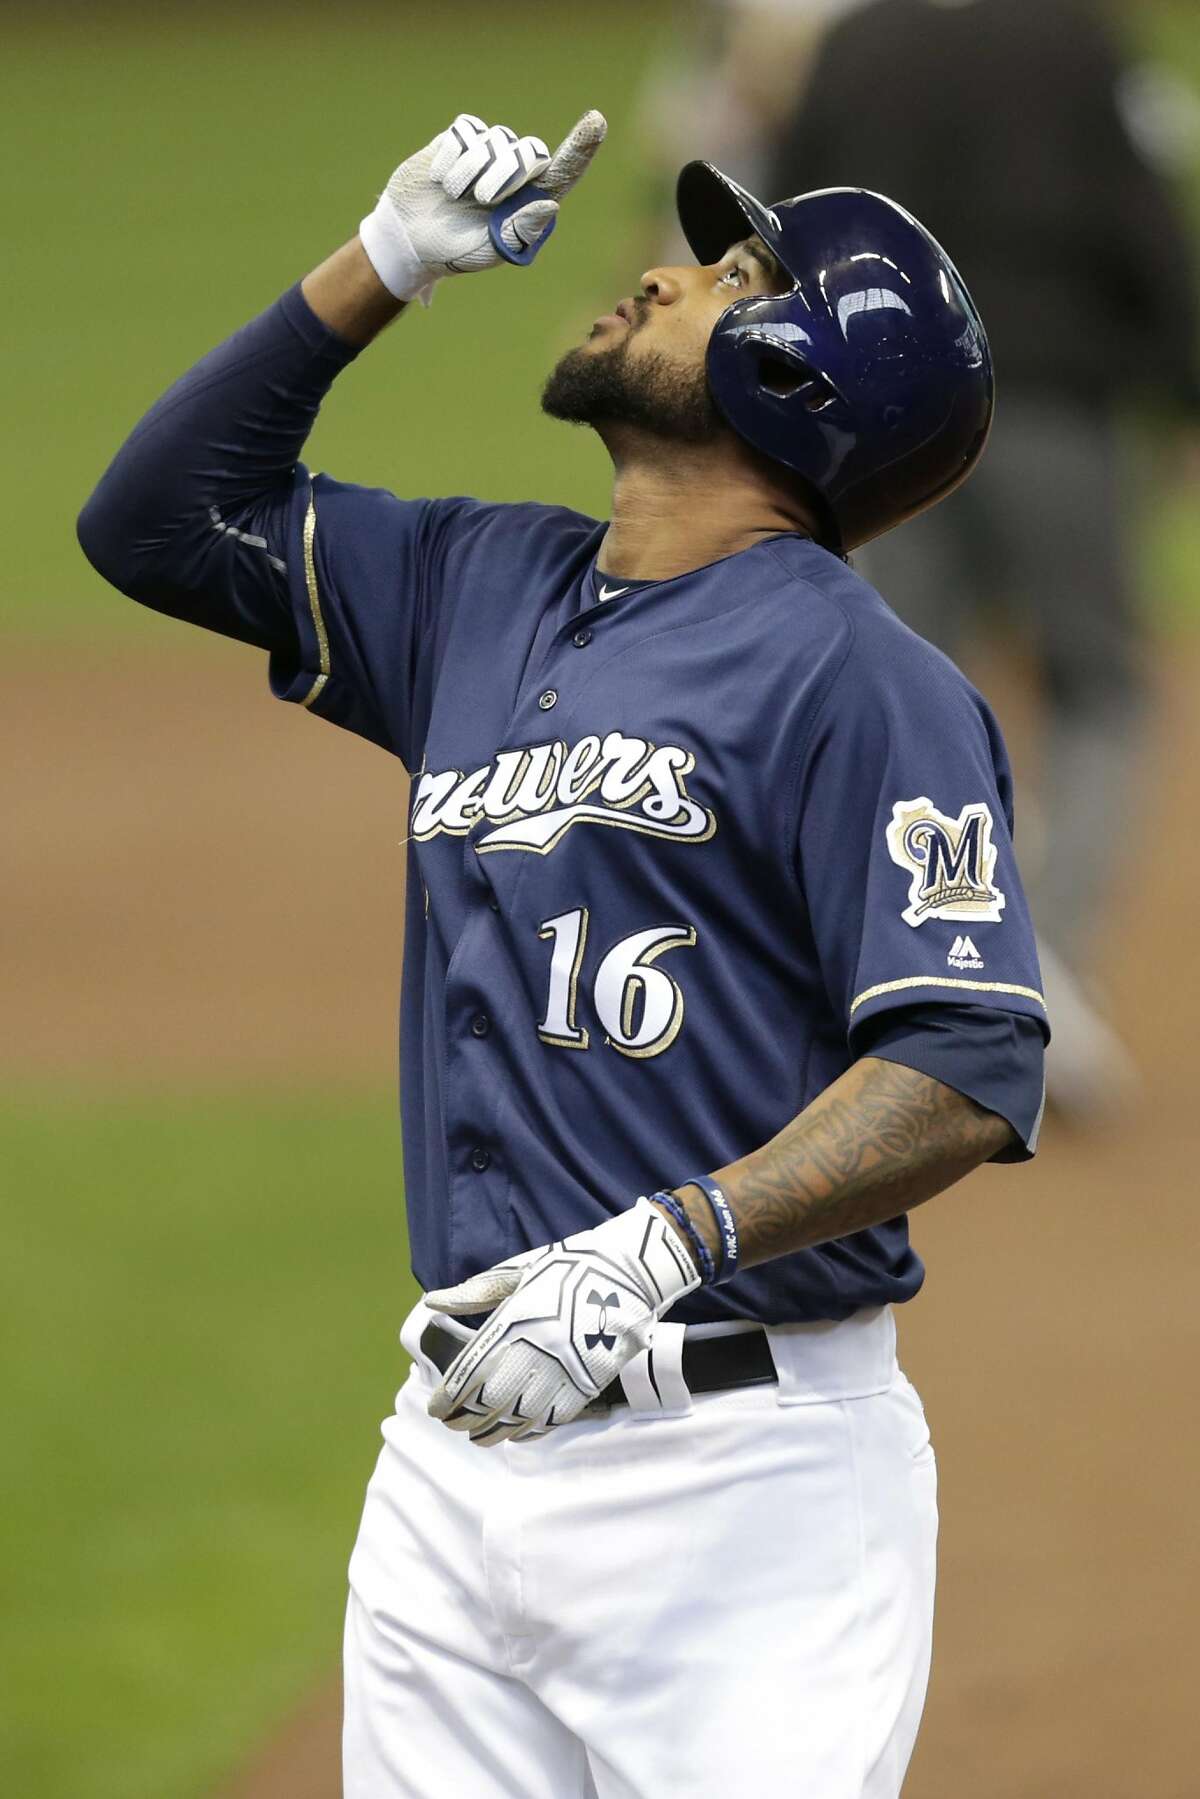 The Brewers have let teams know they would move young, potent right fielder Domingo Santana.